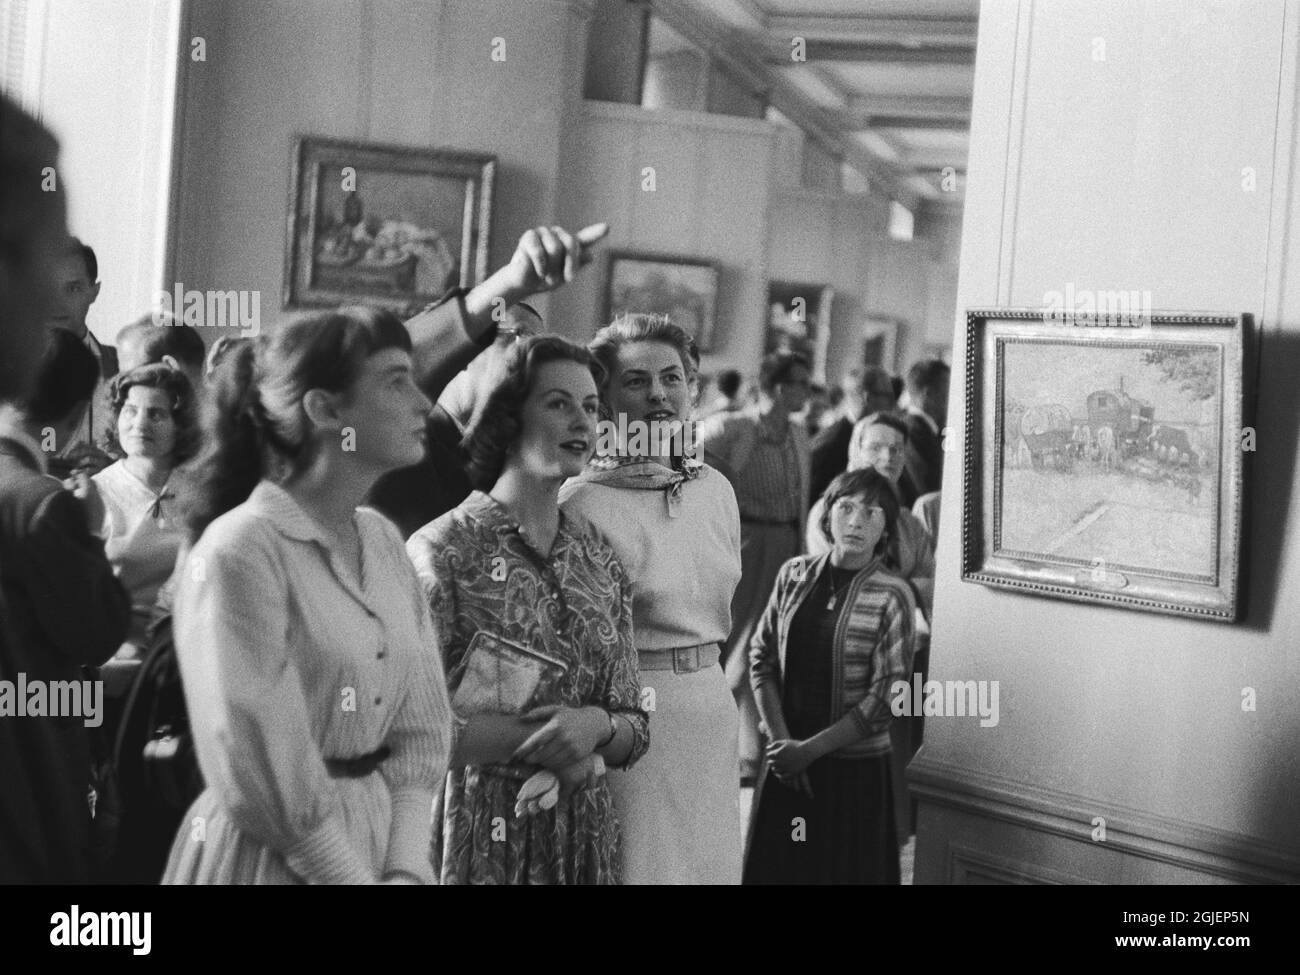 Actress Ingrid Bergman (right) during a visit to The Louvre in Paris together with her daughter Pia Lindstrom (next to Ingrid on the left) Stock Photo